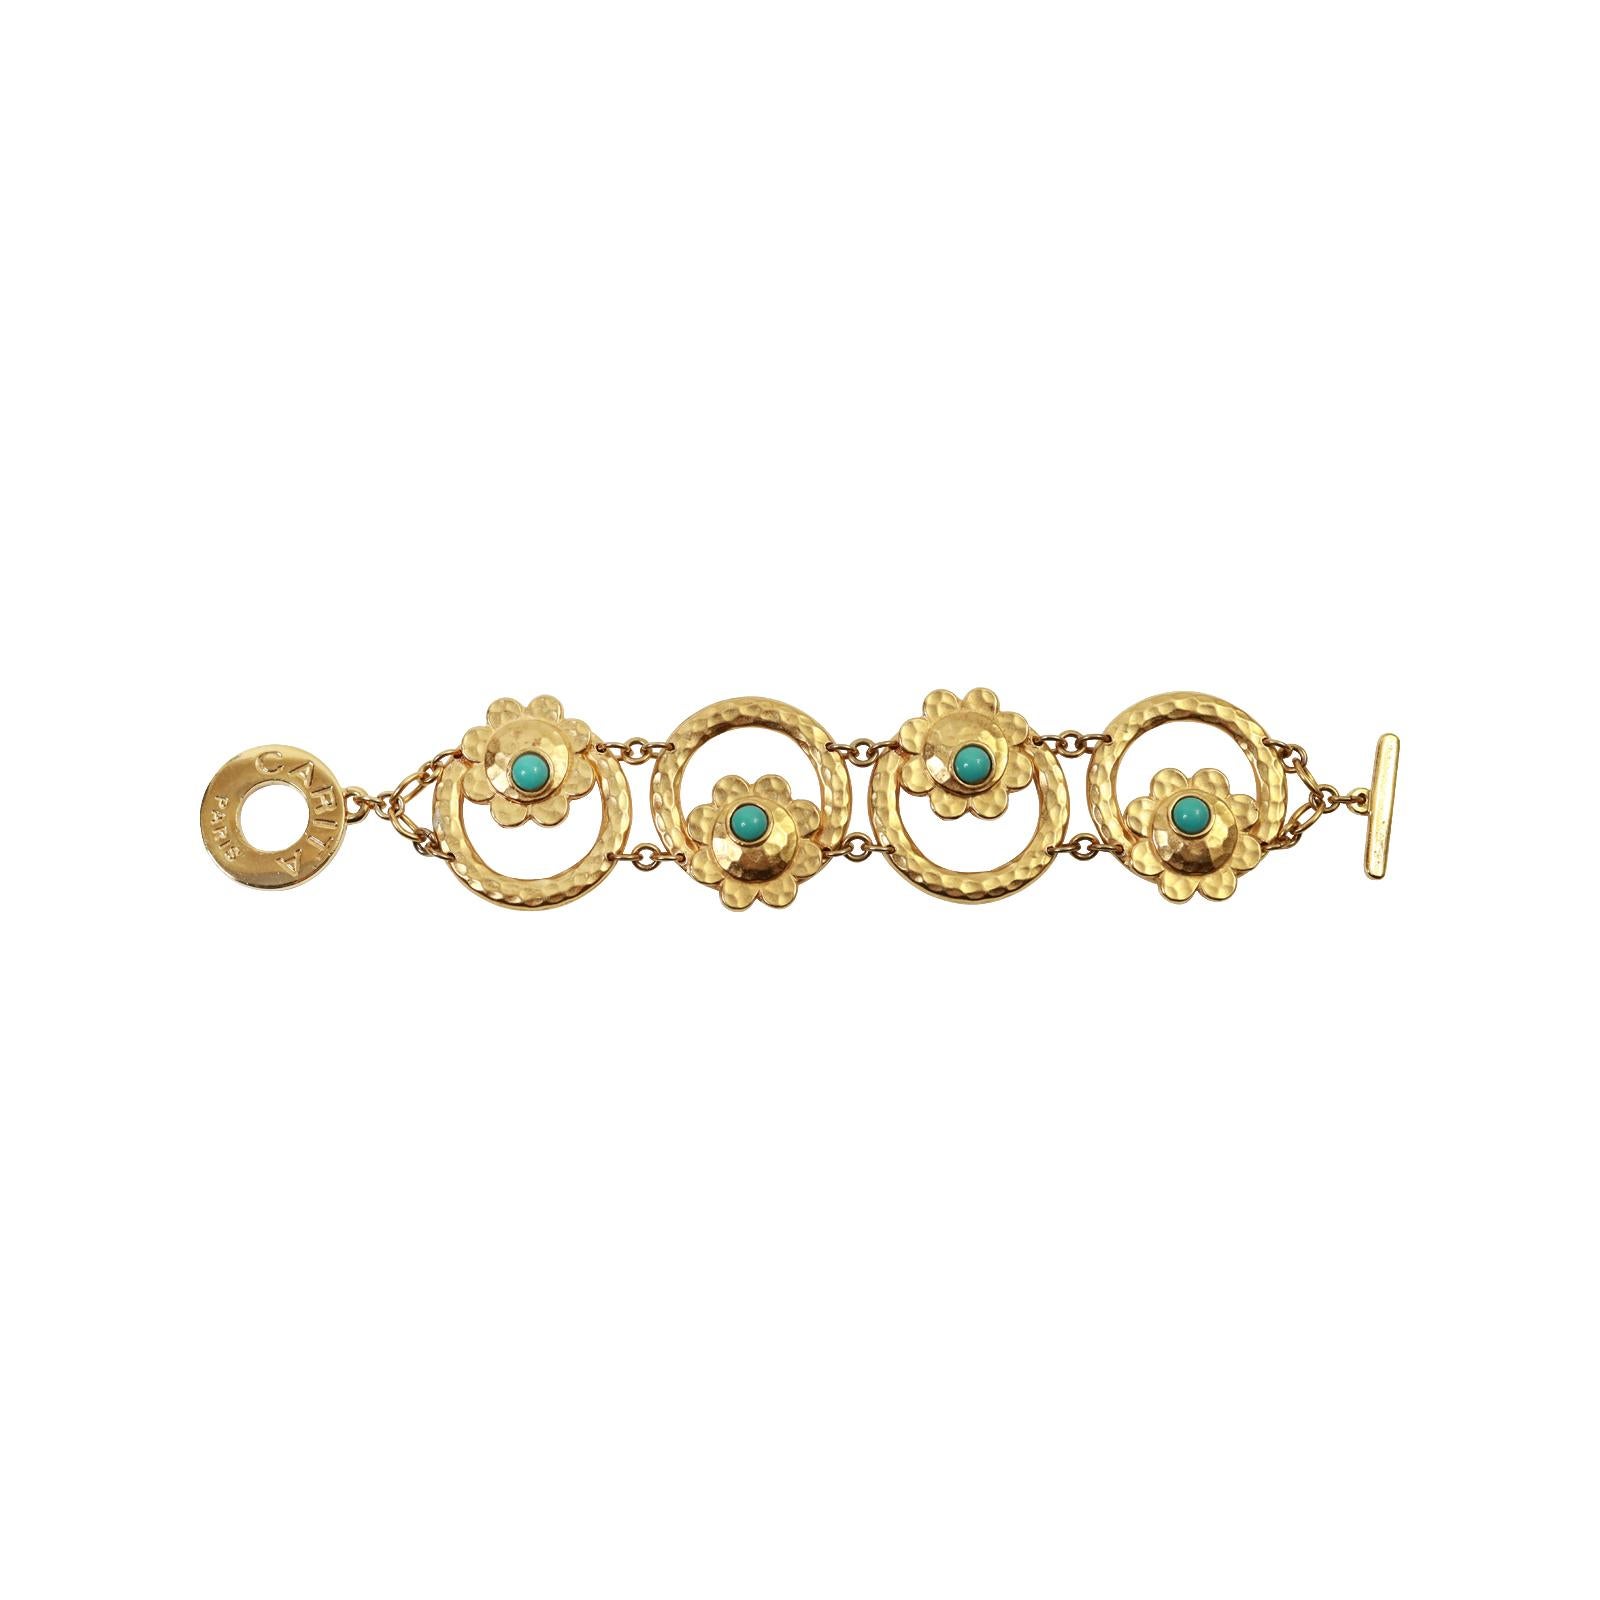 Vintage Carita Paris Gold Tone Bracelet Circa 1980s.  This is such a beautiful and well made bracelet.  There are round links that are hammered and inside are flowers with a disc of Faux Turquoise peeping out to make the flower. That sits on